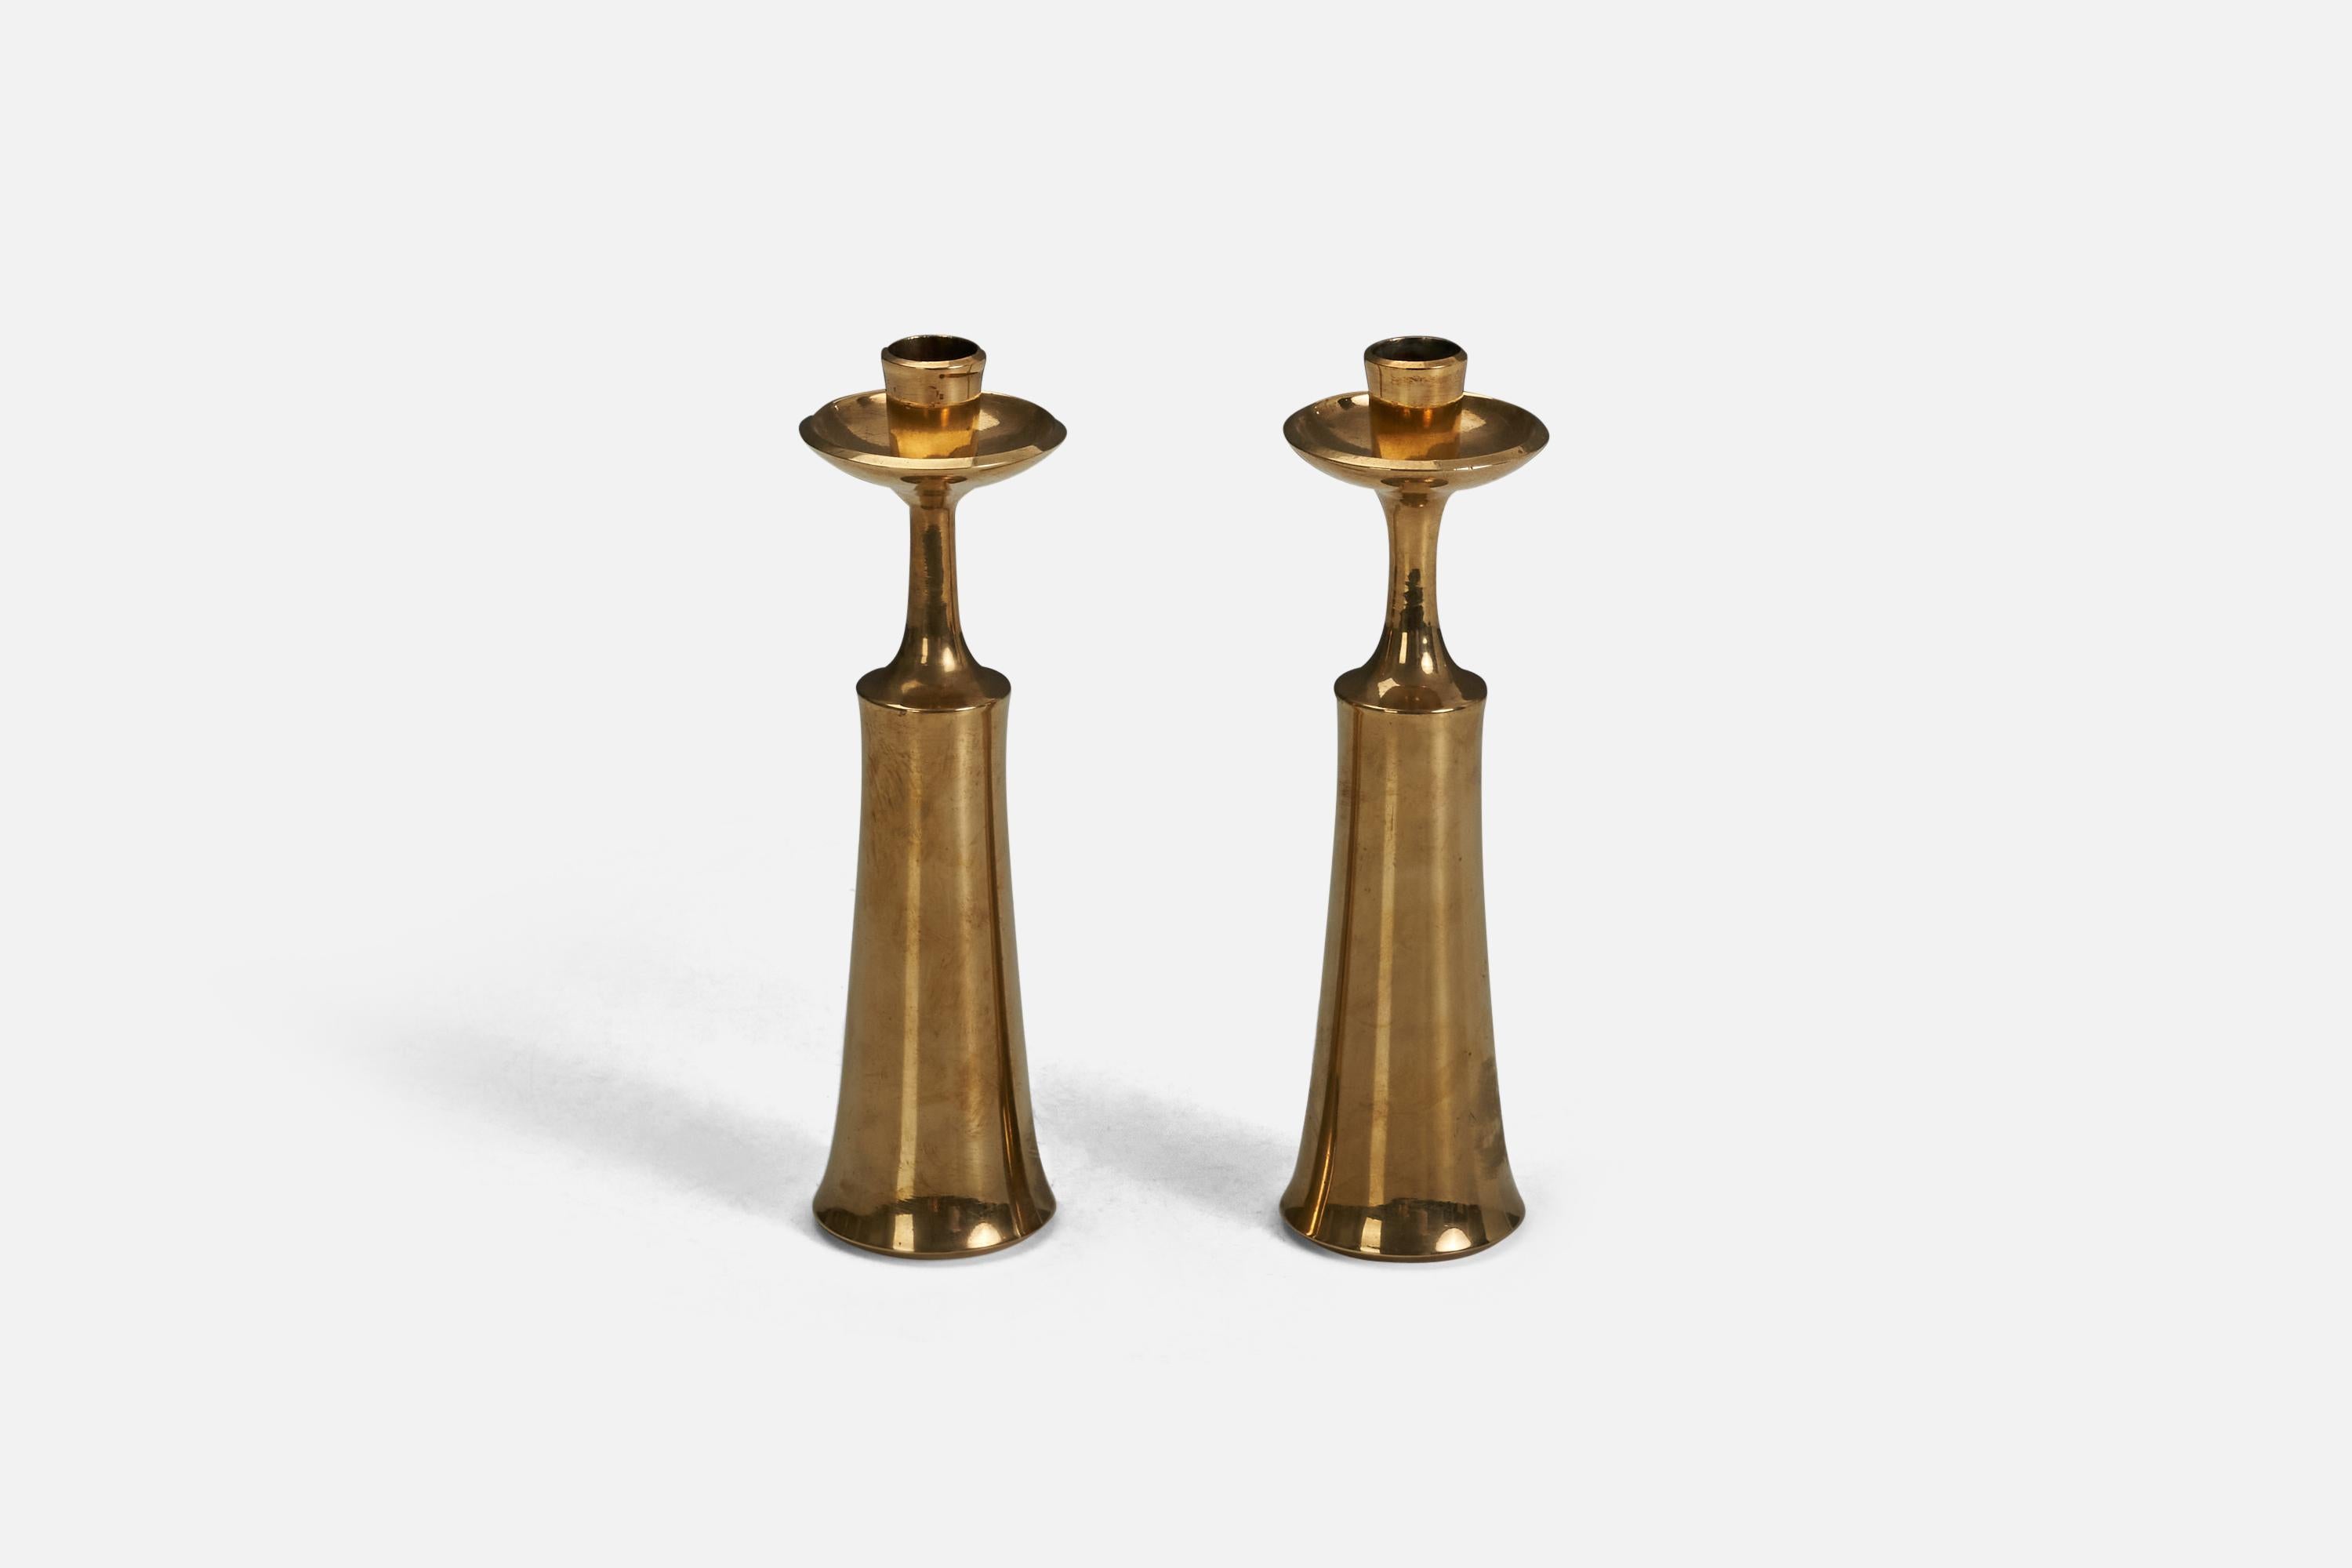 A pair of brass candlesticks designed and produced by Jens Quistgaard, Denmark, 1950s.